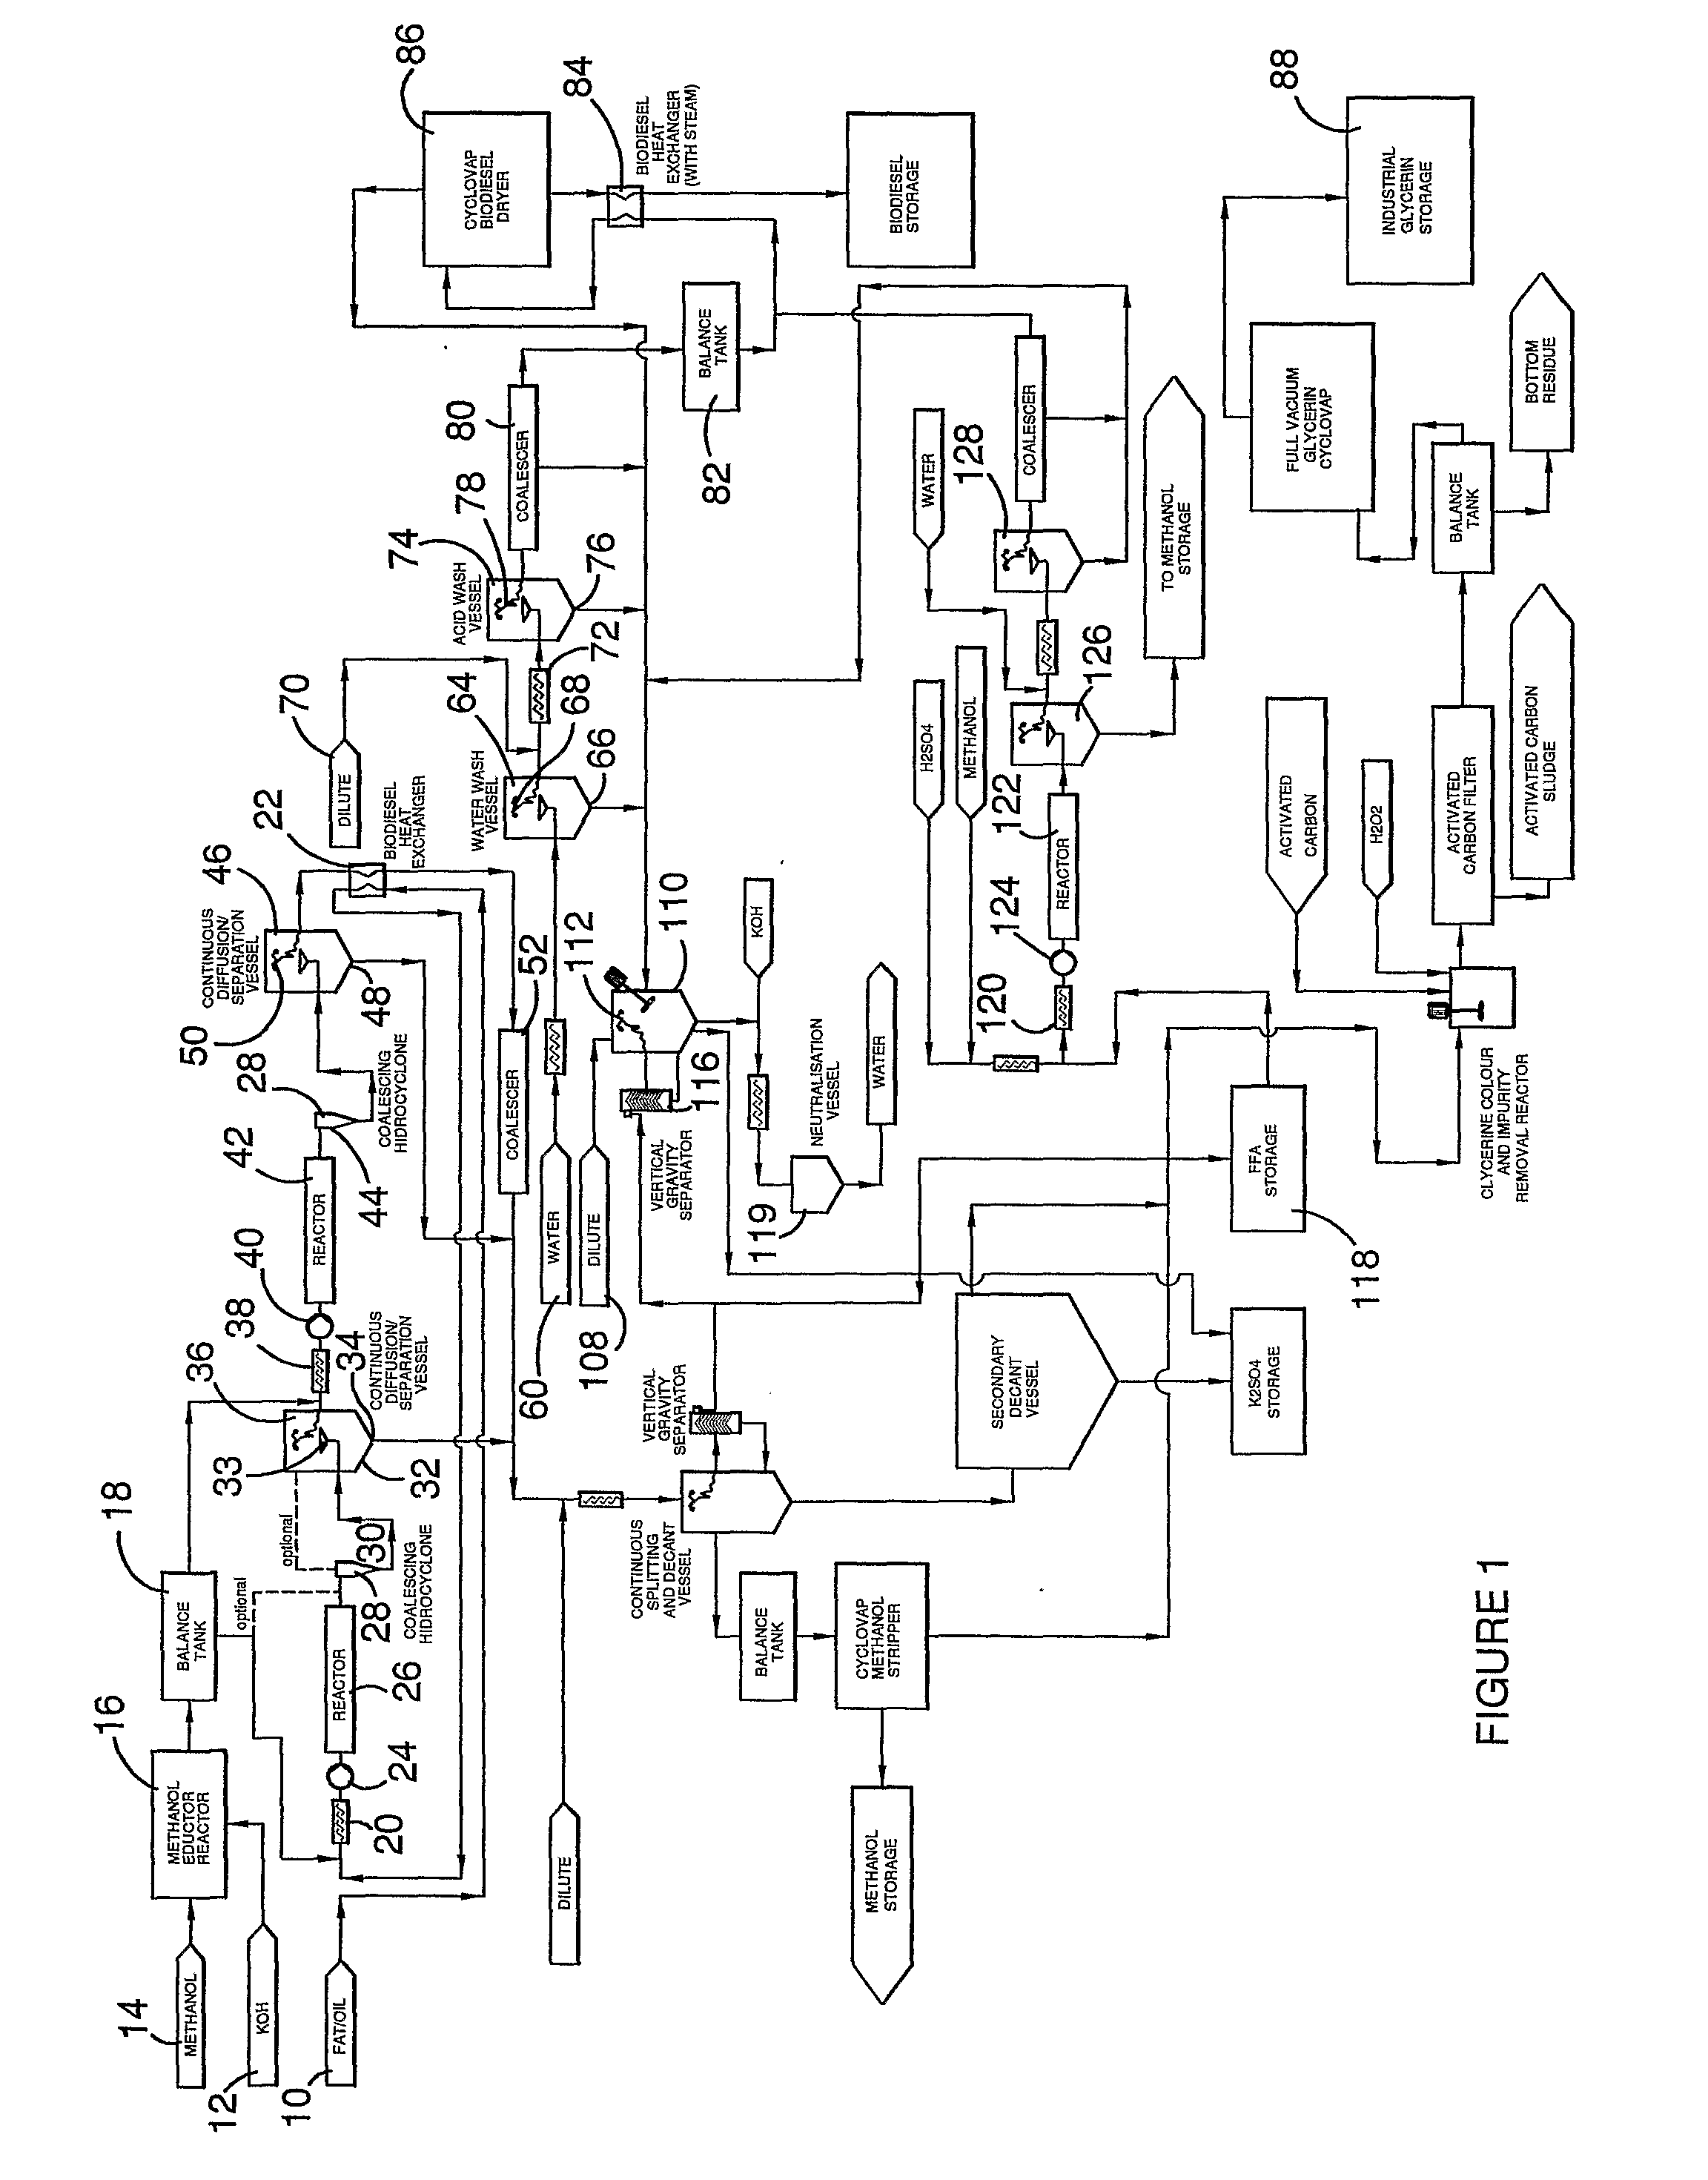 Method and Apparatus for Manufacturing and Purifying Bio-Diesel